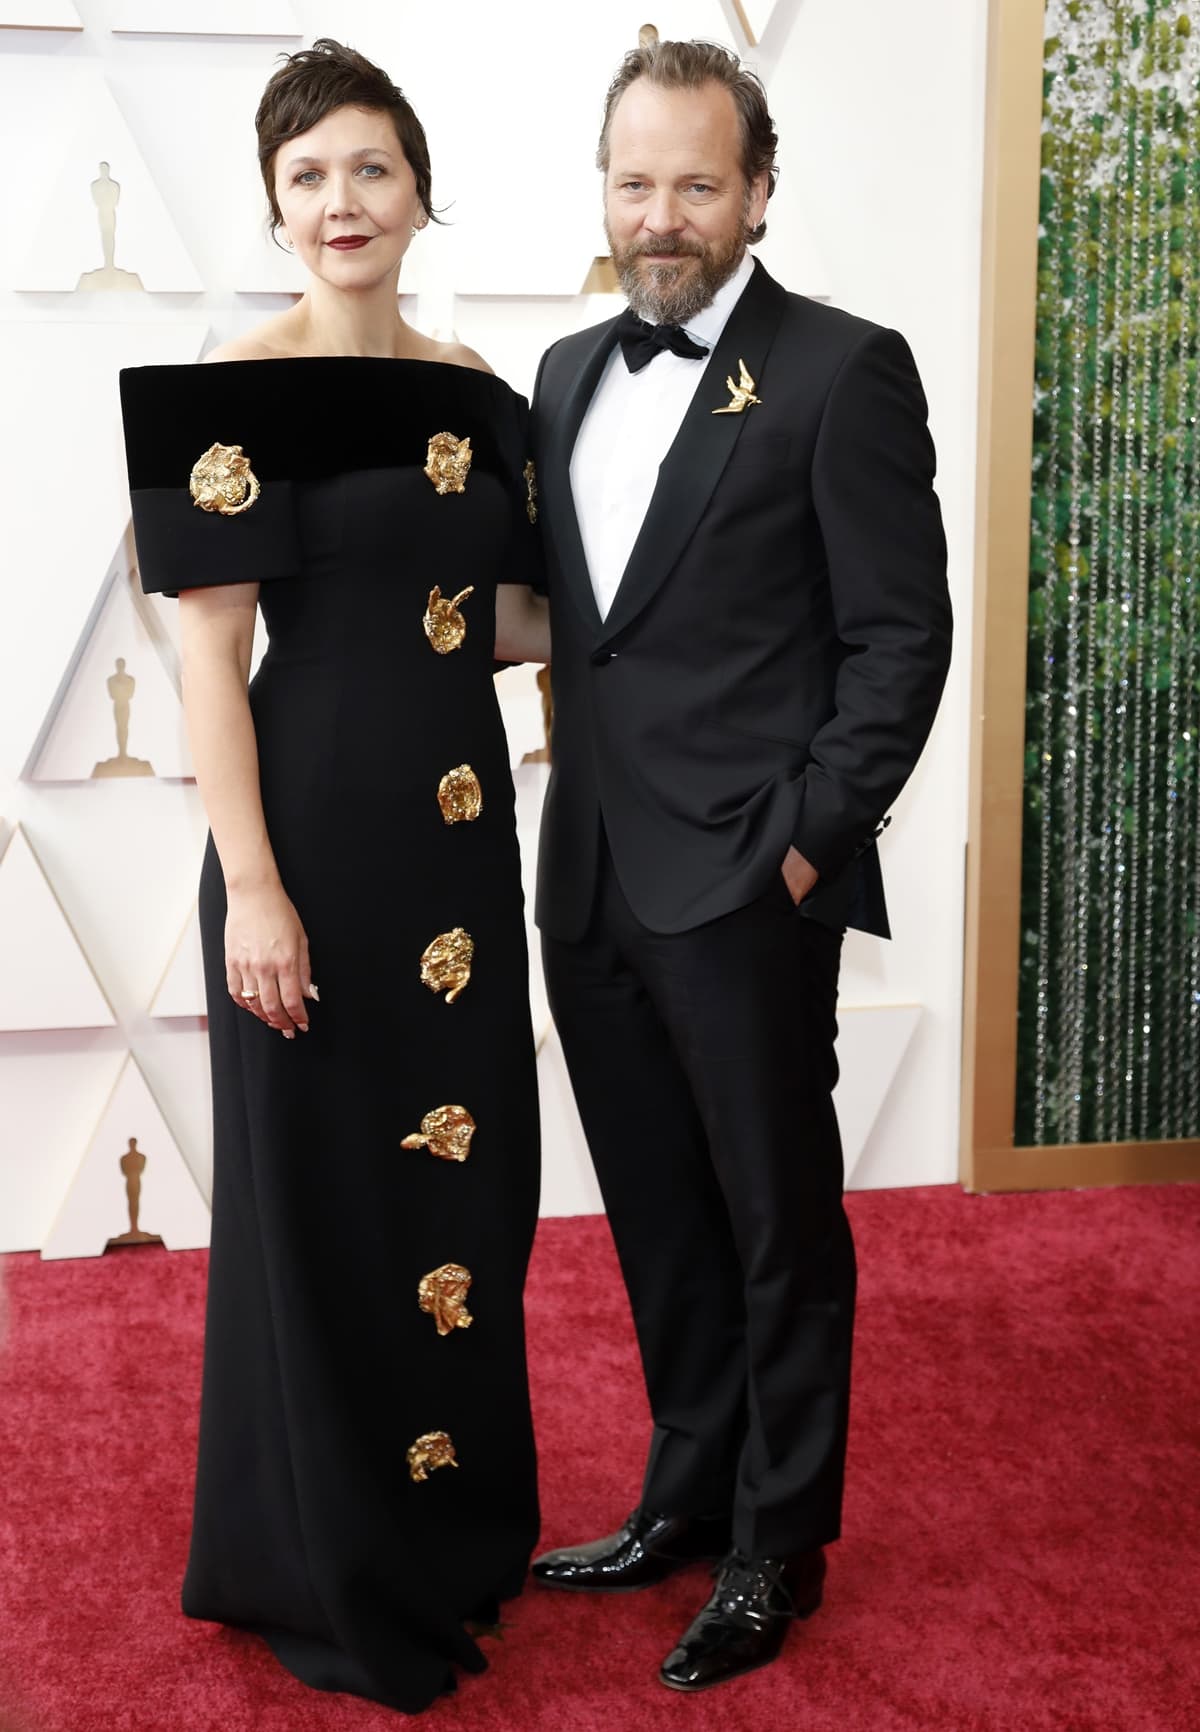 Peter Sarsgaard and Maggie Gyllenhaal in a Schiaparelli dress and Grace Lee jewelry at the 94th Annual Academy Awards